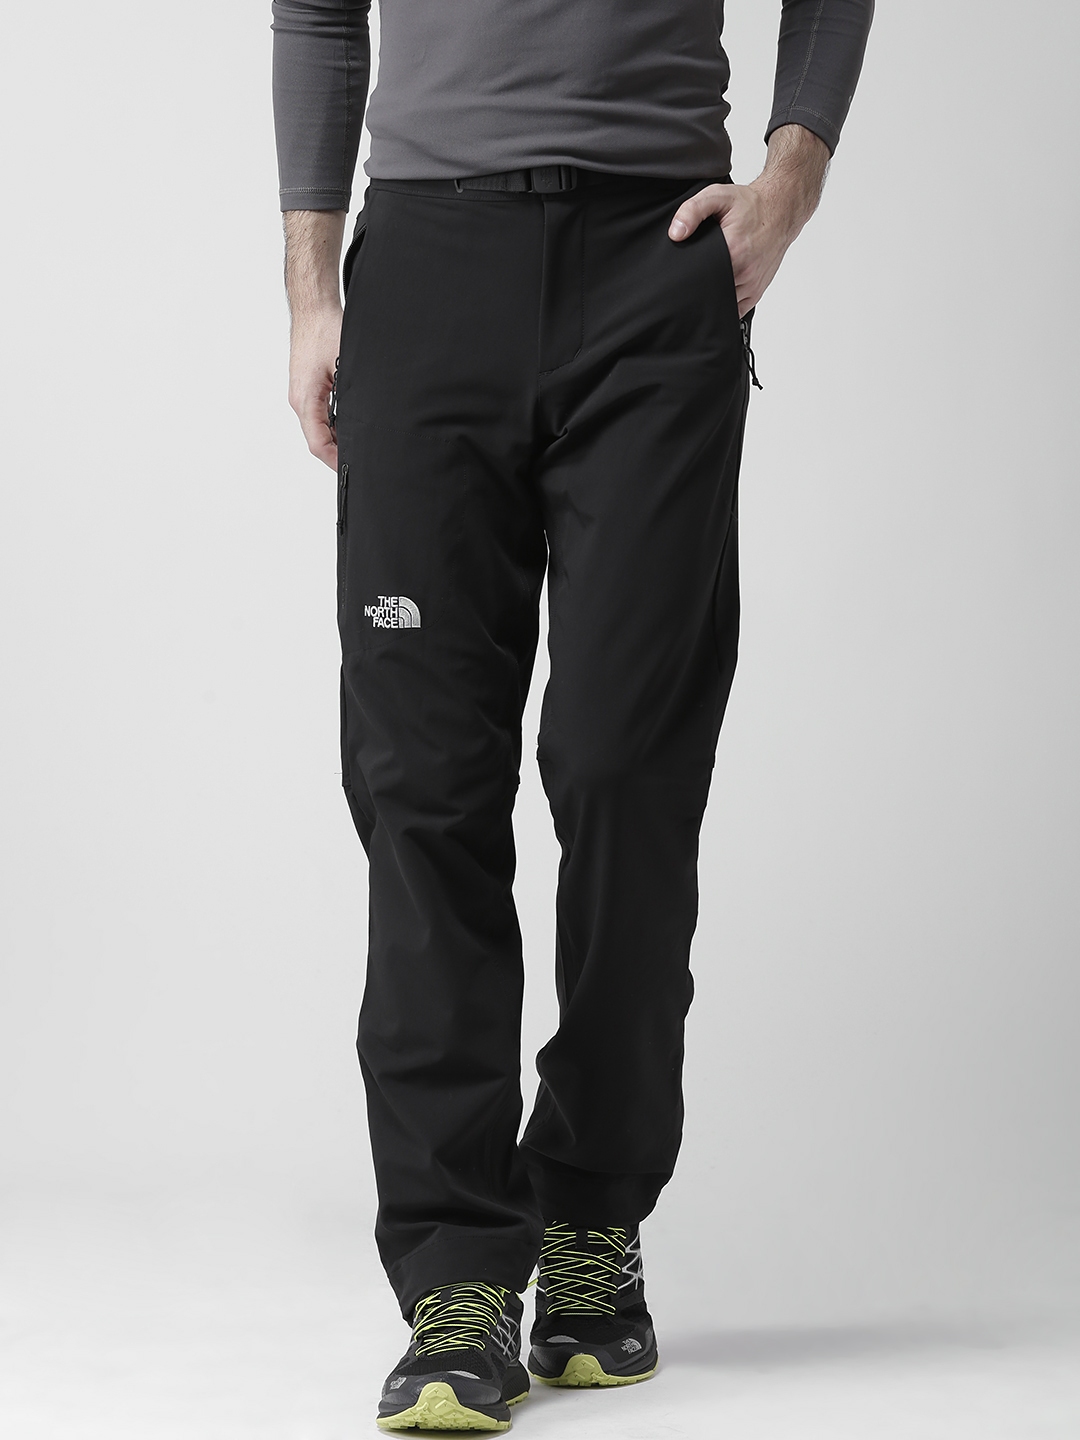 Black The North Face Performance Woven Track Pants  JD Sports Malaysia